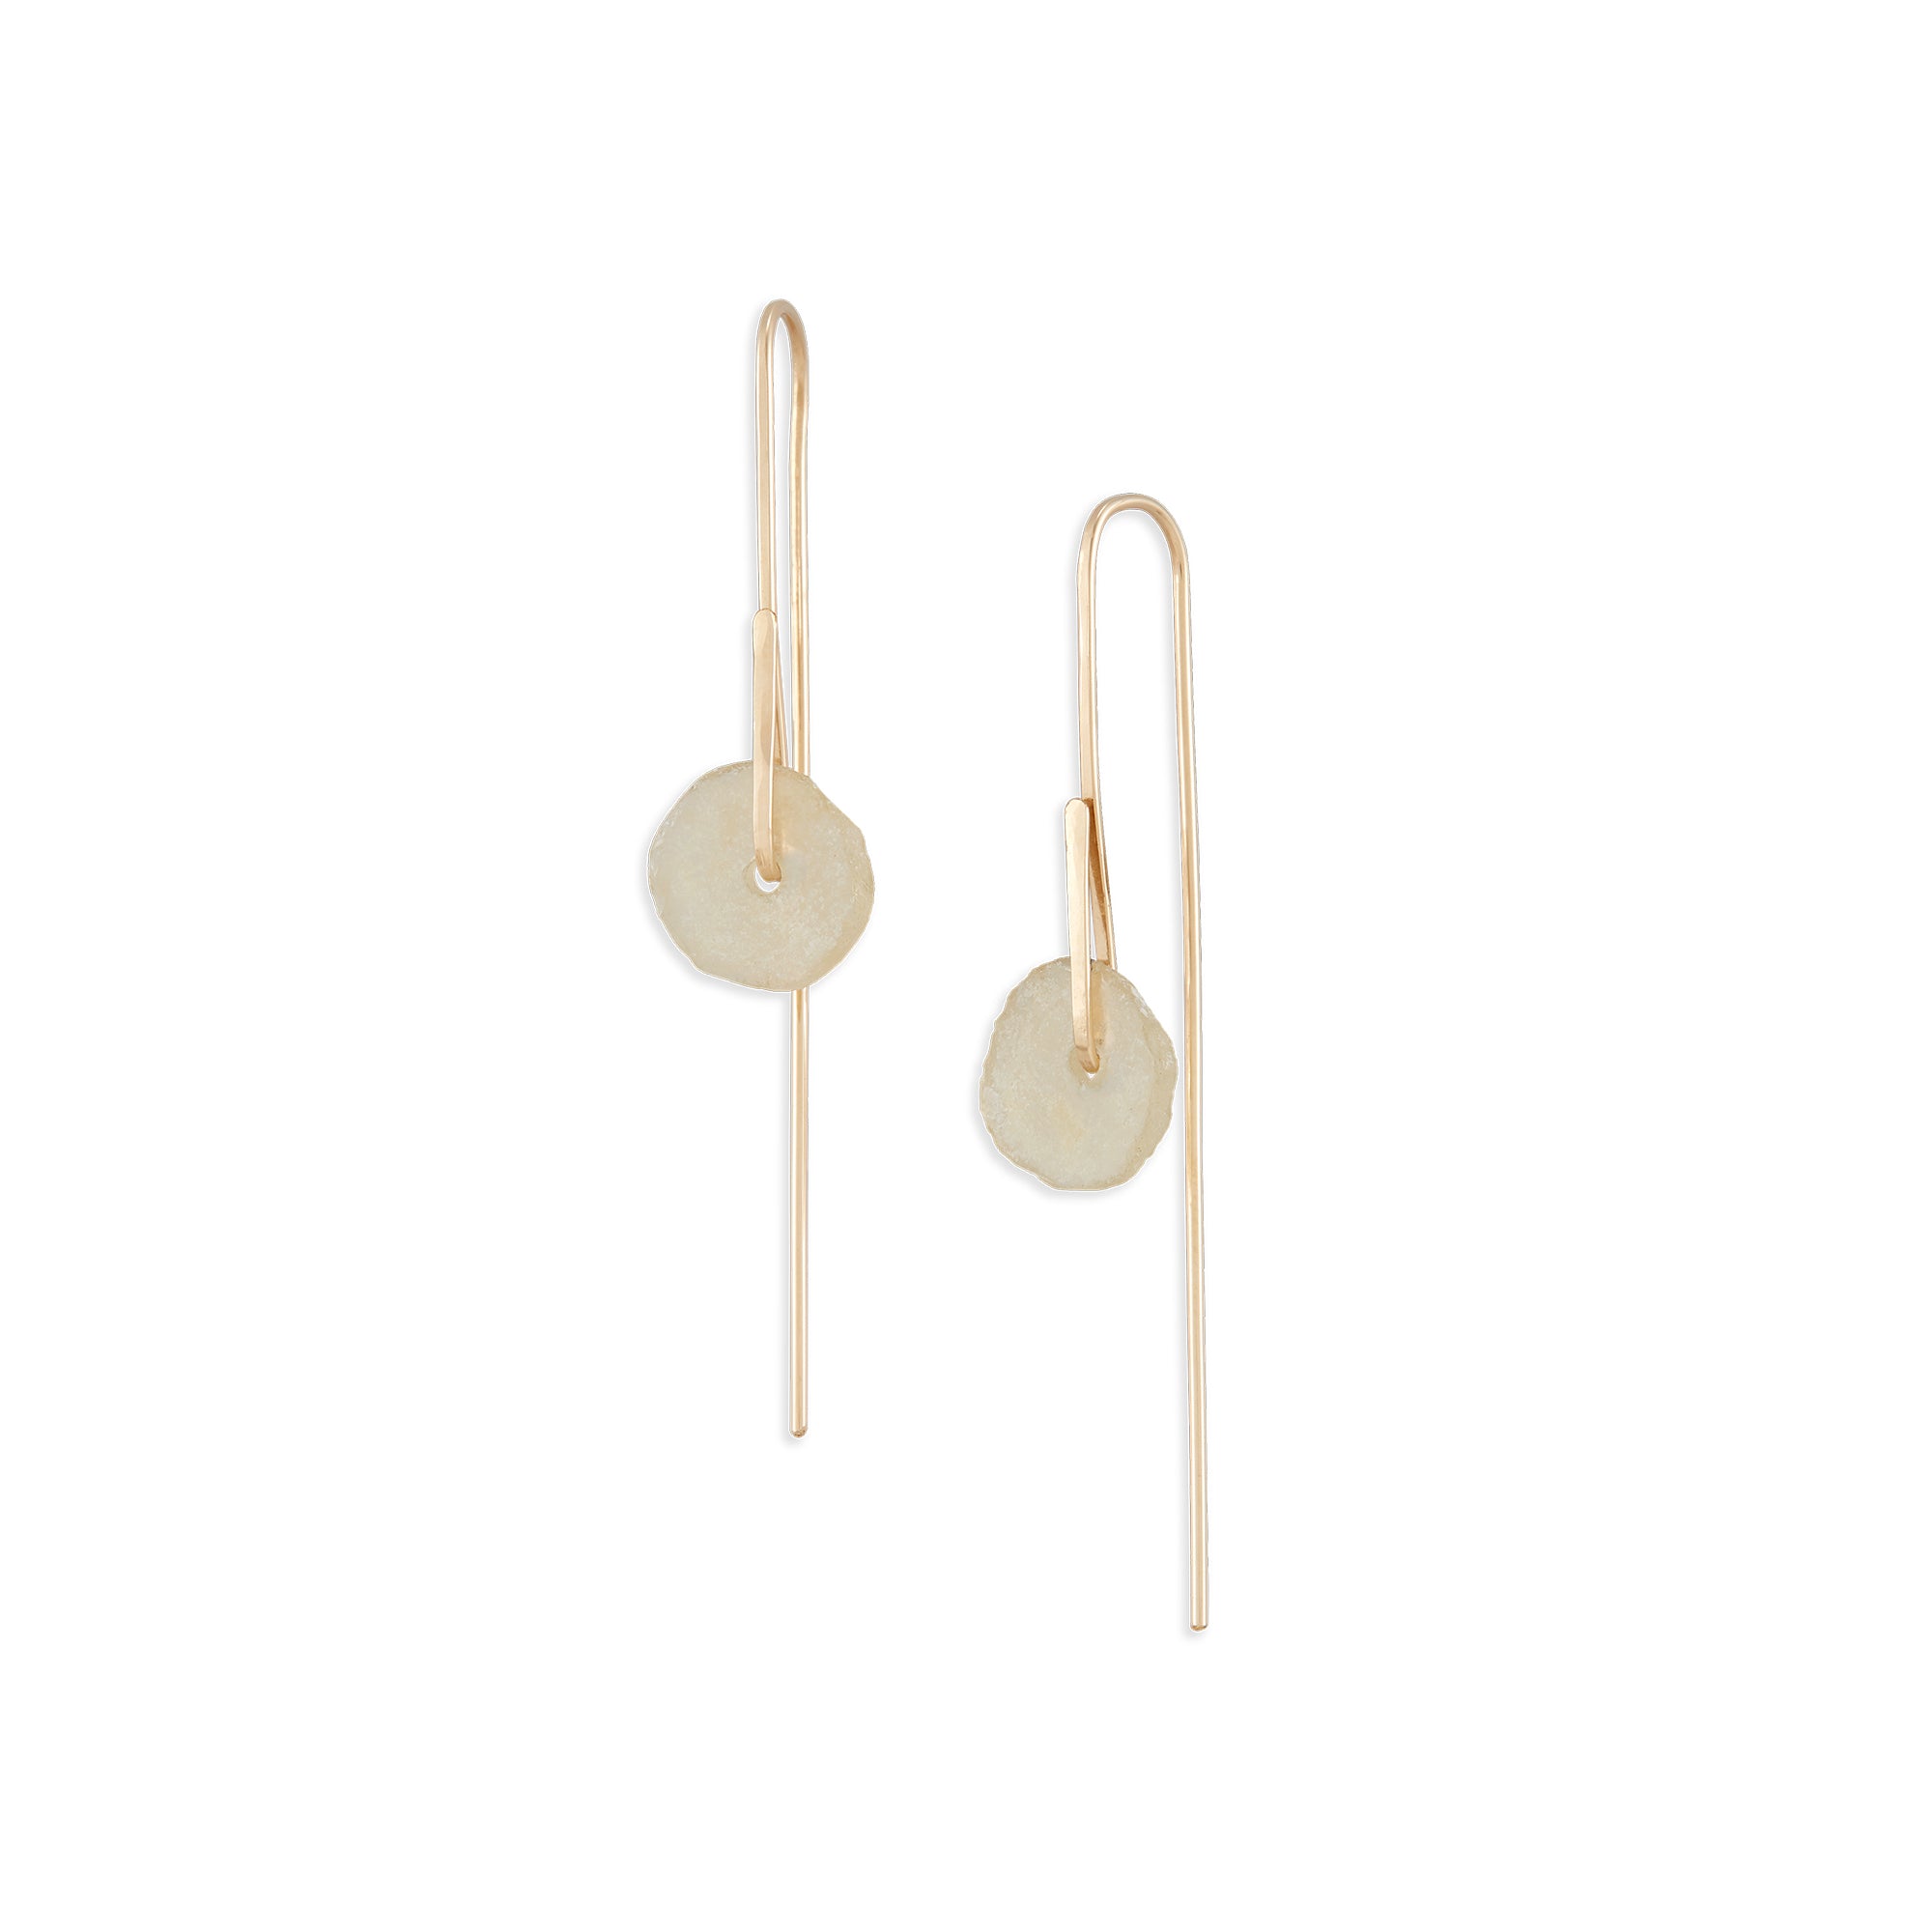 Simple small threader style earrings featuring hand-hammered 14k gold wire and a pair of Bactrian Glass beads